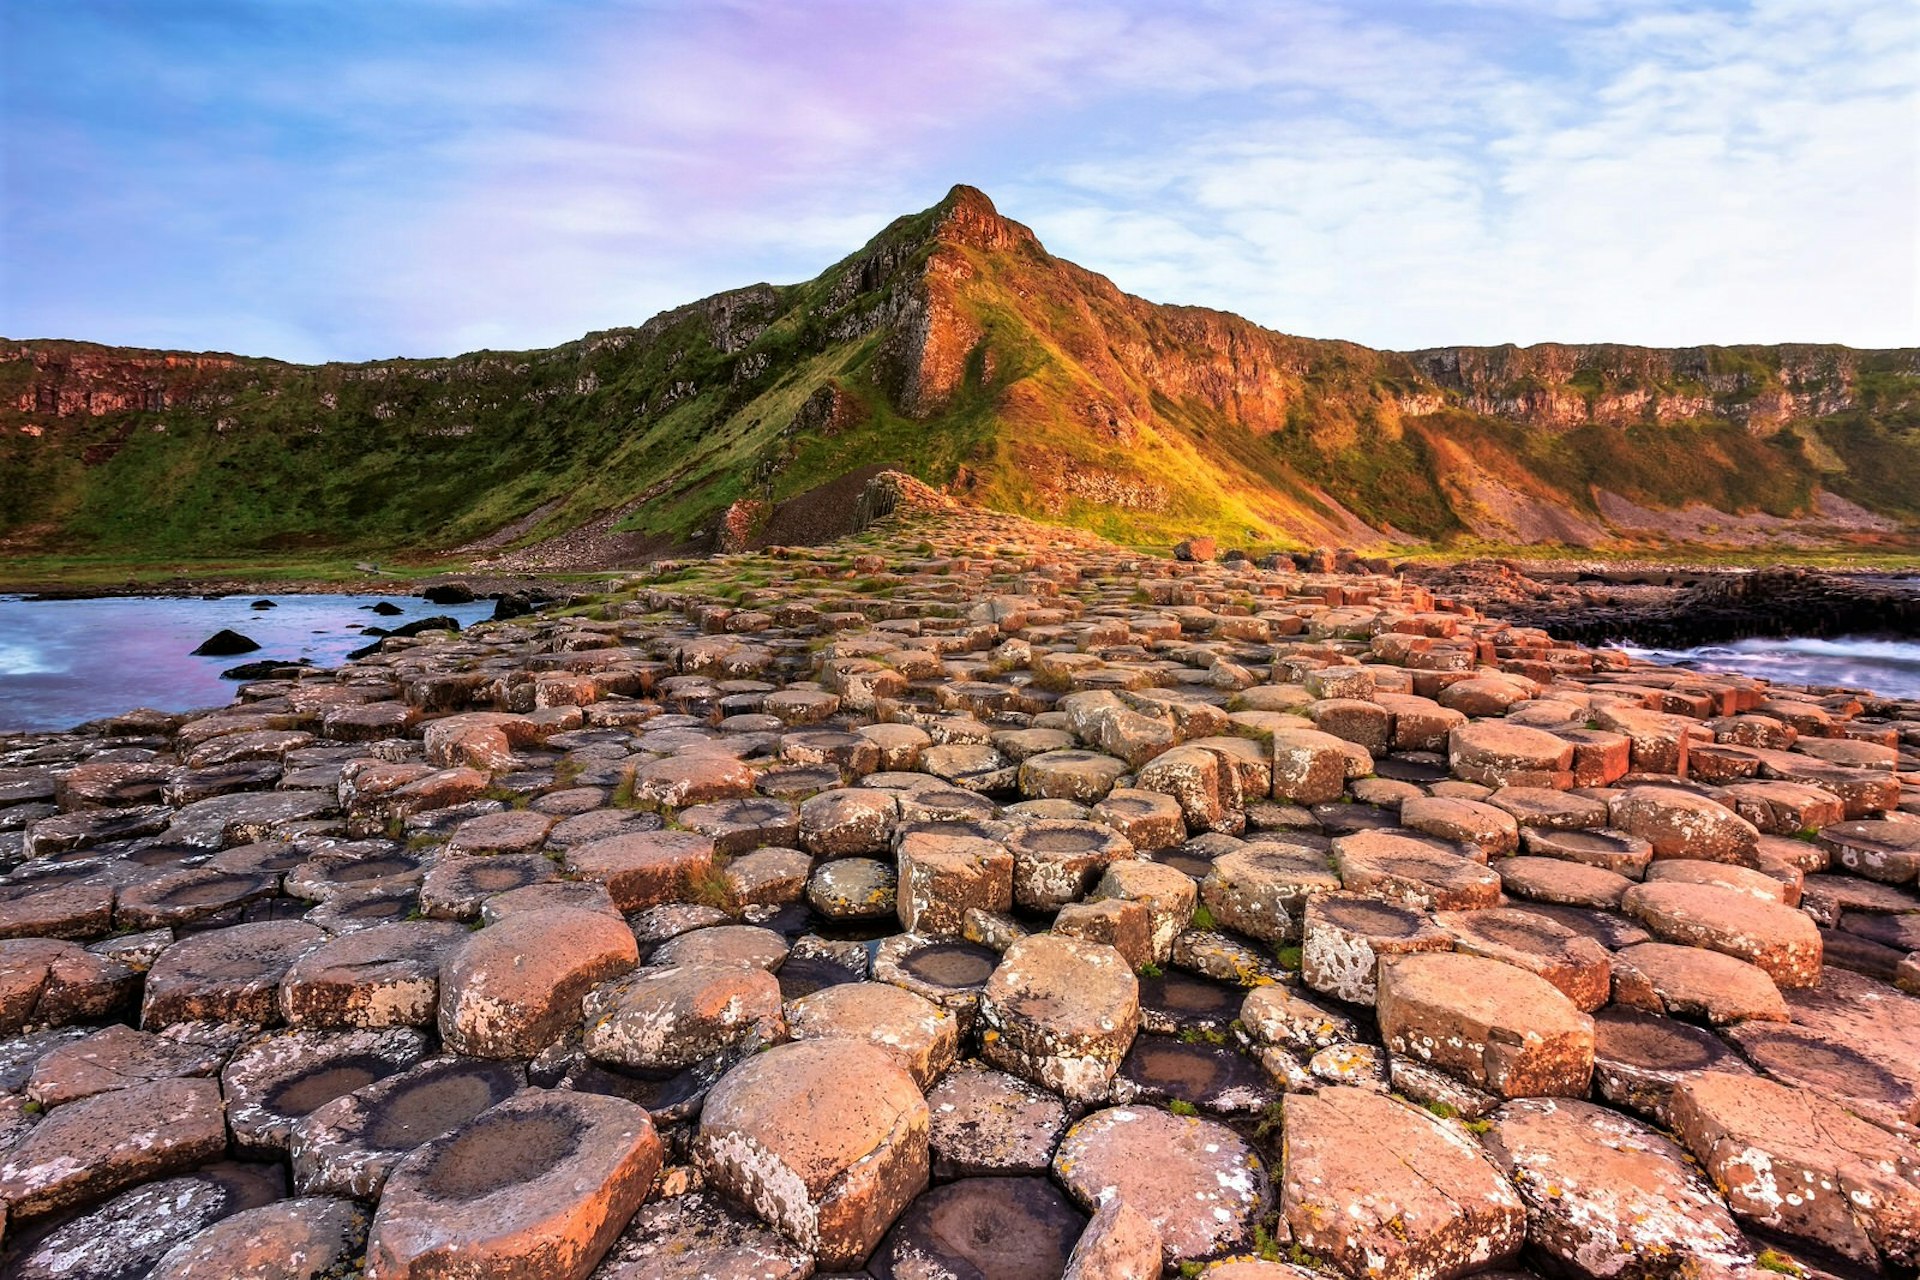 A view of the Giant's Causeway's rock formations at sunset in Antrim, Ireland.